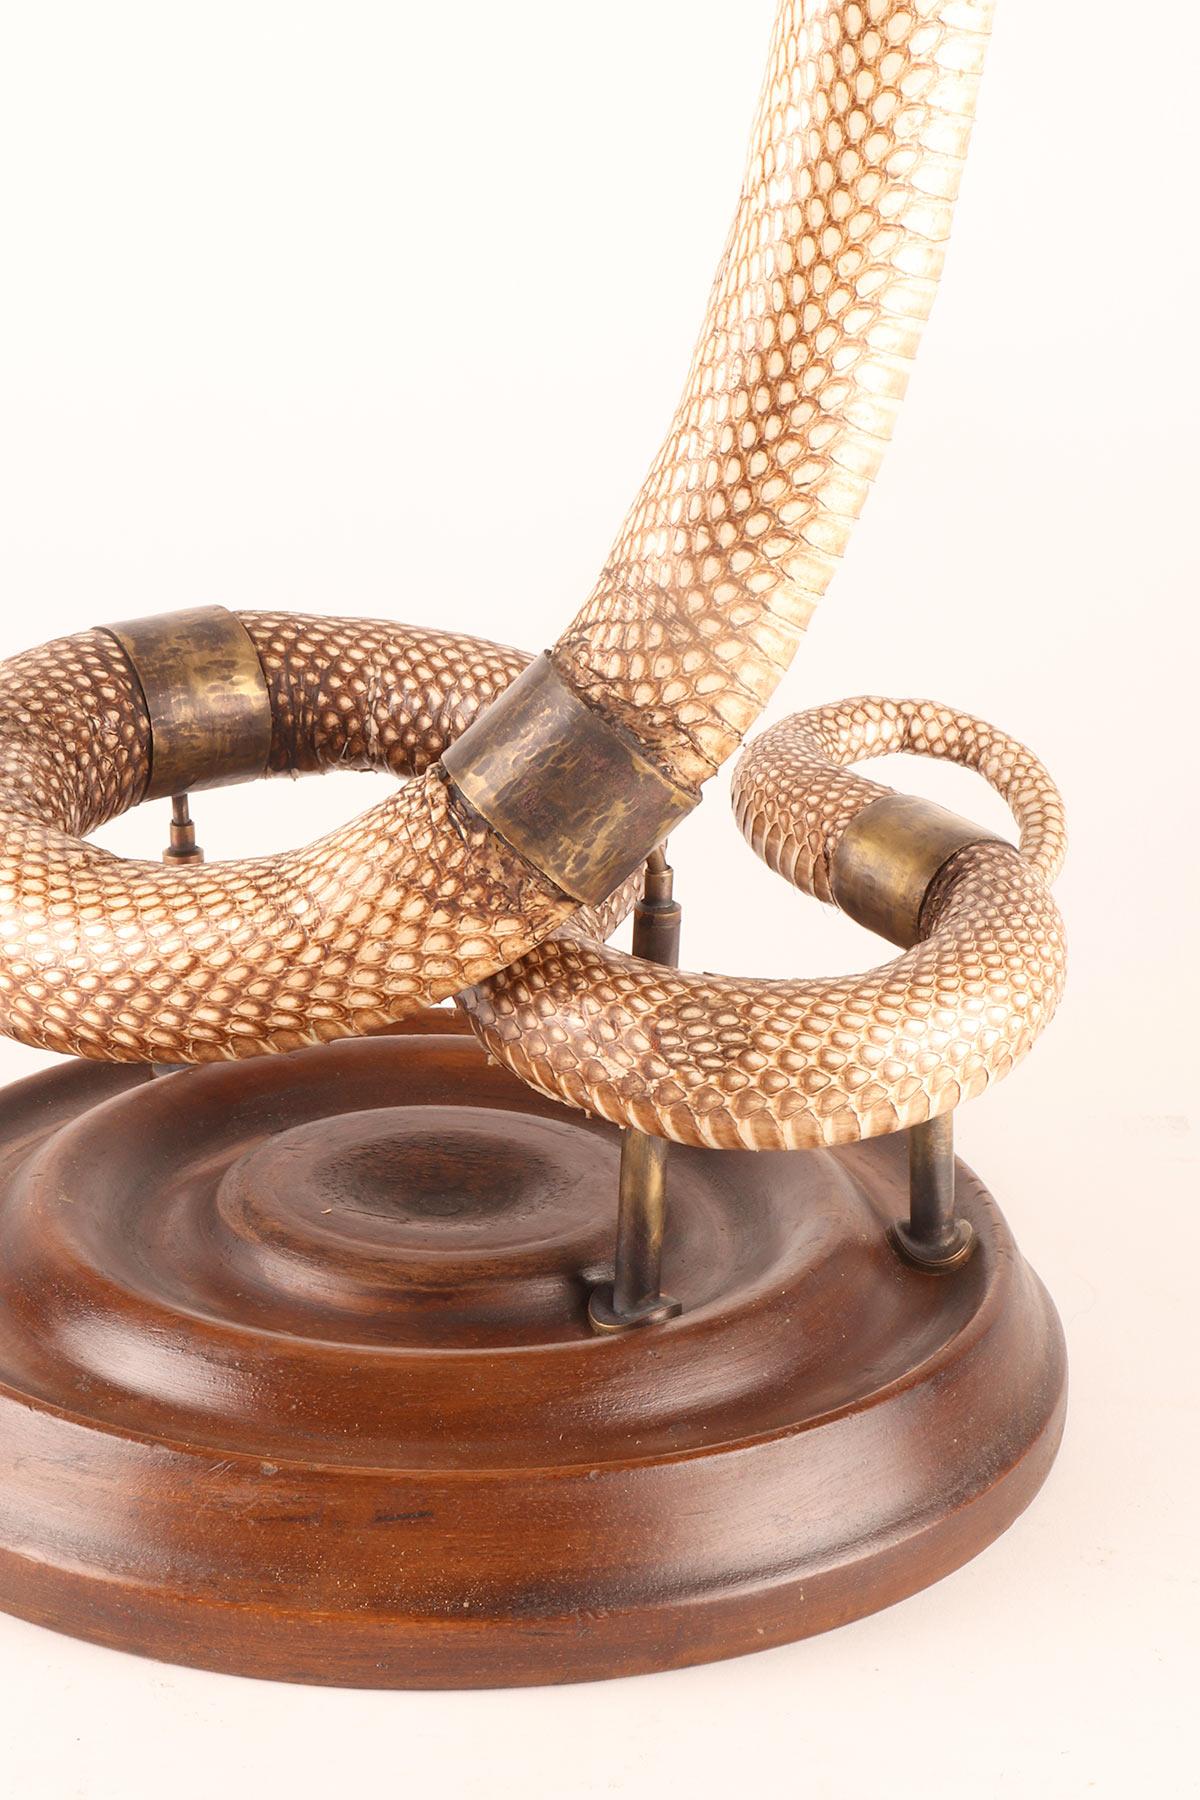 A specimen of Hemachatus hemachatus snake taxidermy, Italy 1890. For Sale 8